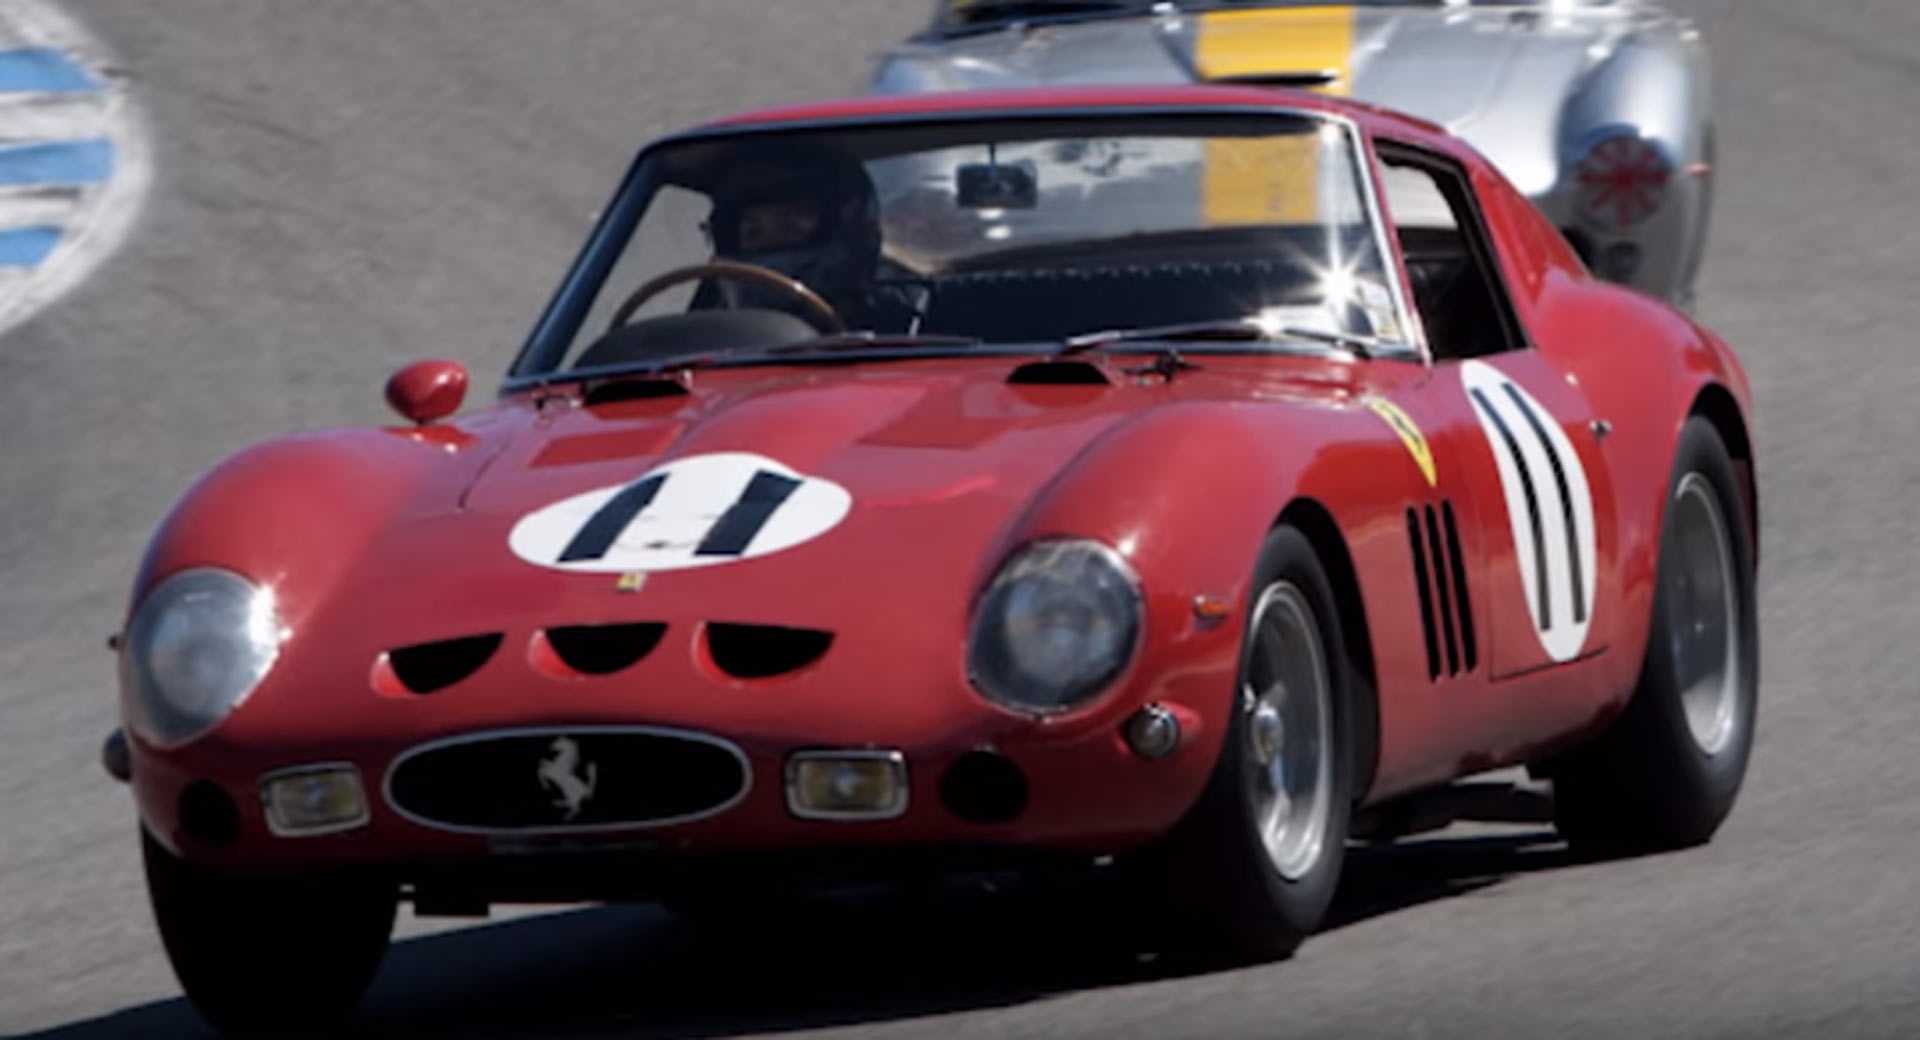 This Guy's Grandad Once Had A Ferrari 250 GTO But Sold It For… $70k! |  Carscoops